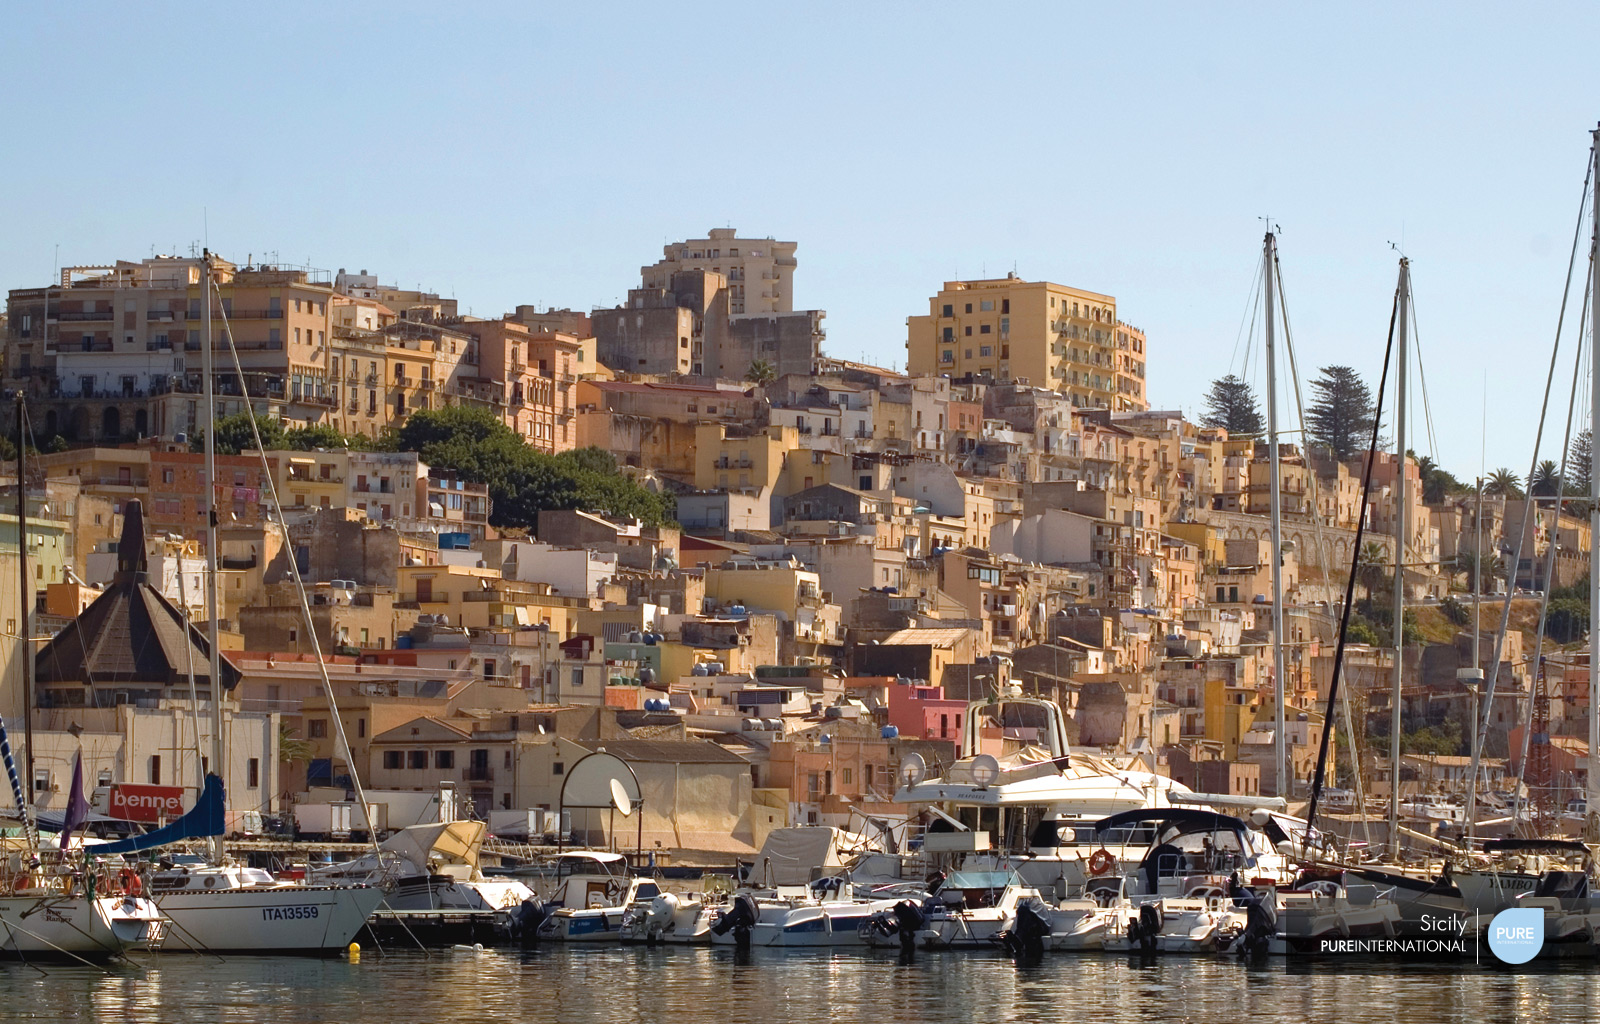 Amazing Wallpaper Pack P Widescreen Image Of Sicily